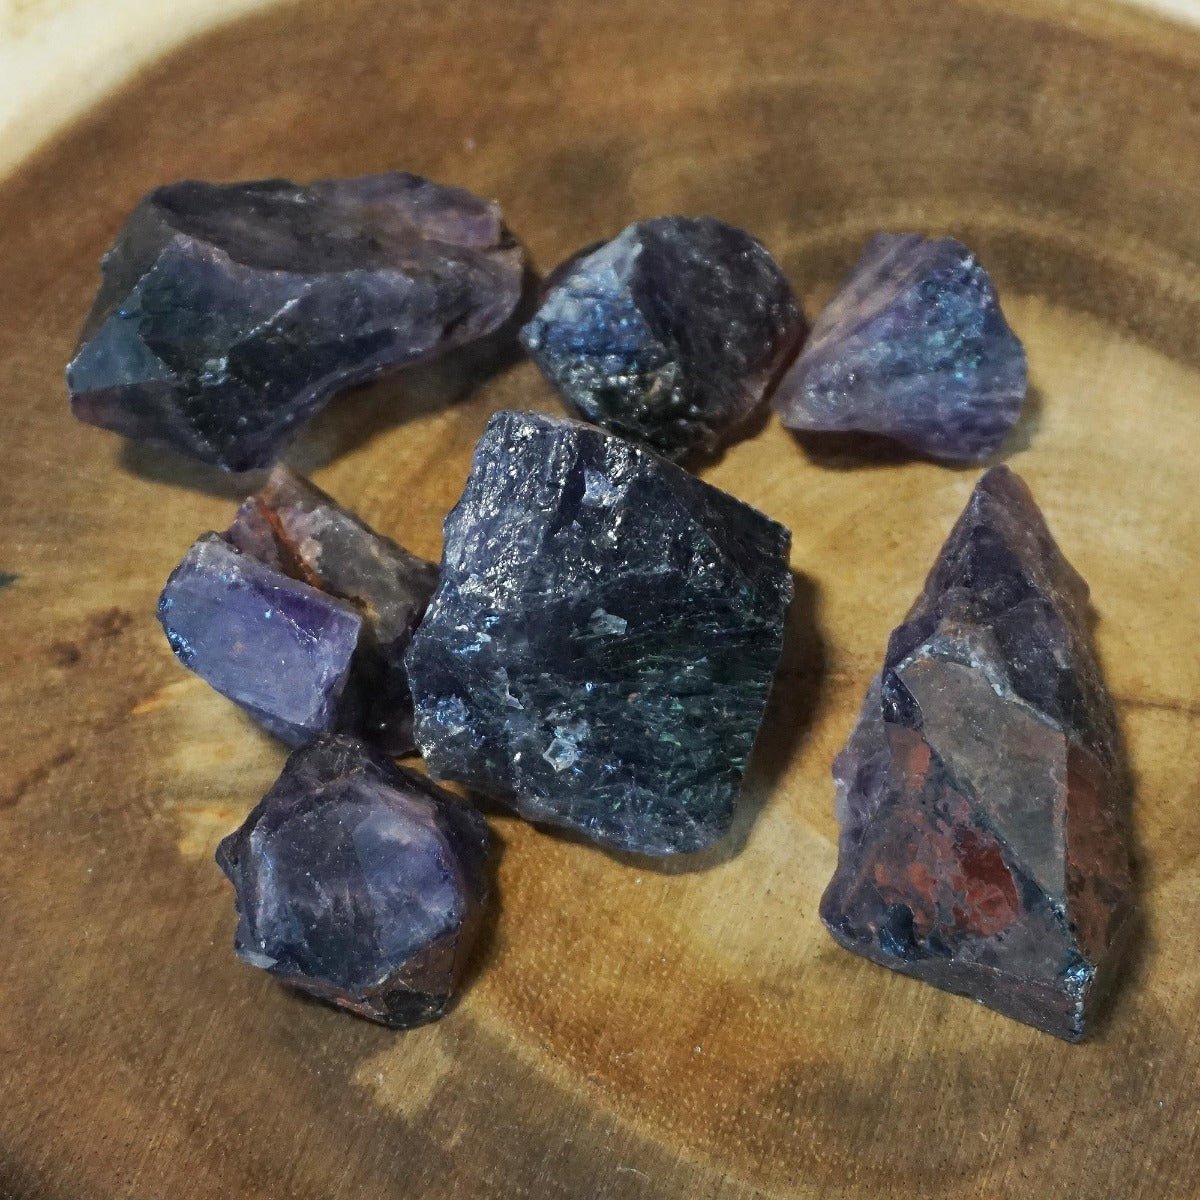 Red Amethyst Natural Stones - 13 Moons